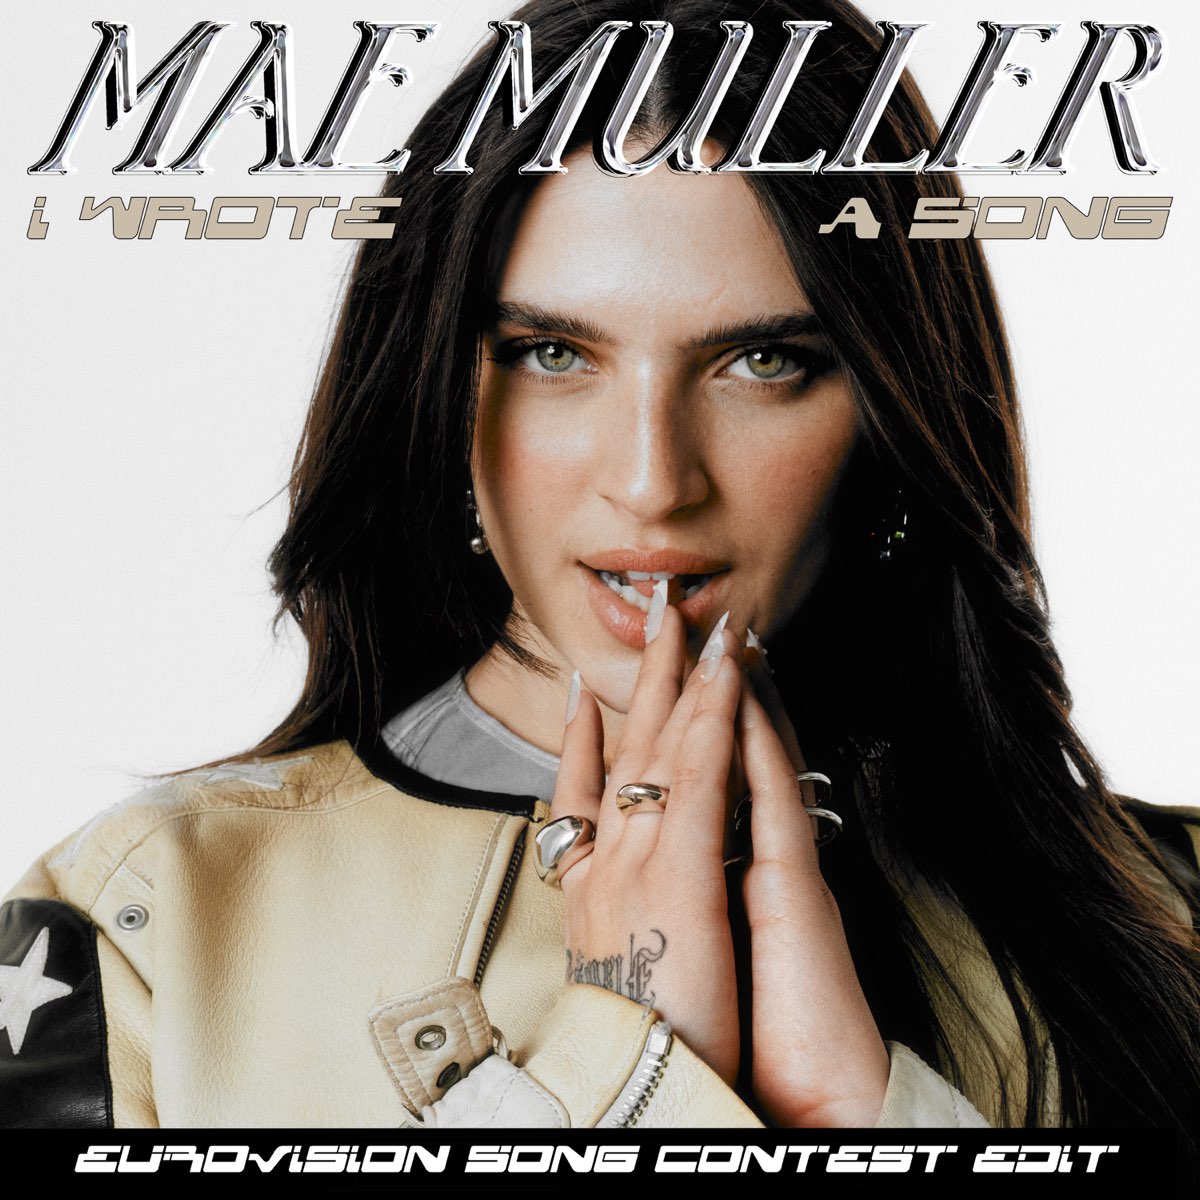 Mae Muller — I Wrote A Song (Eurovision Song Contest Edit) cover artwork